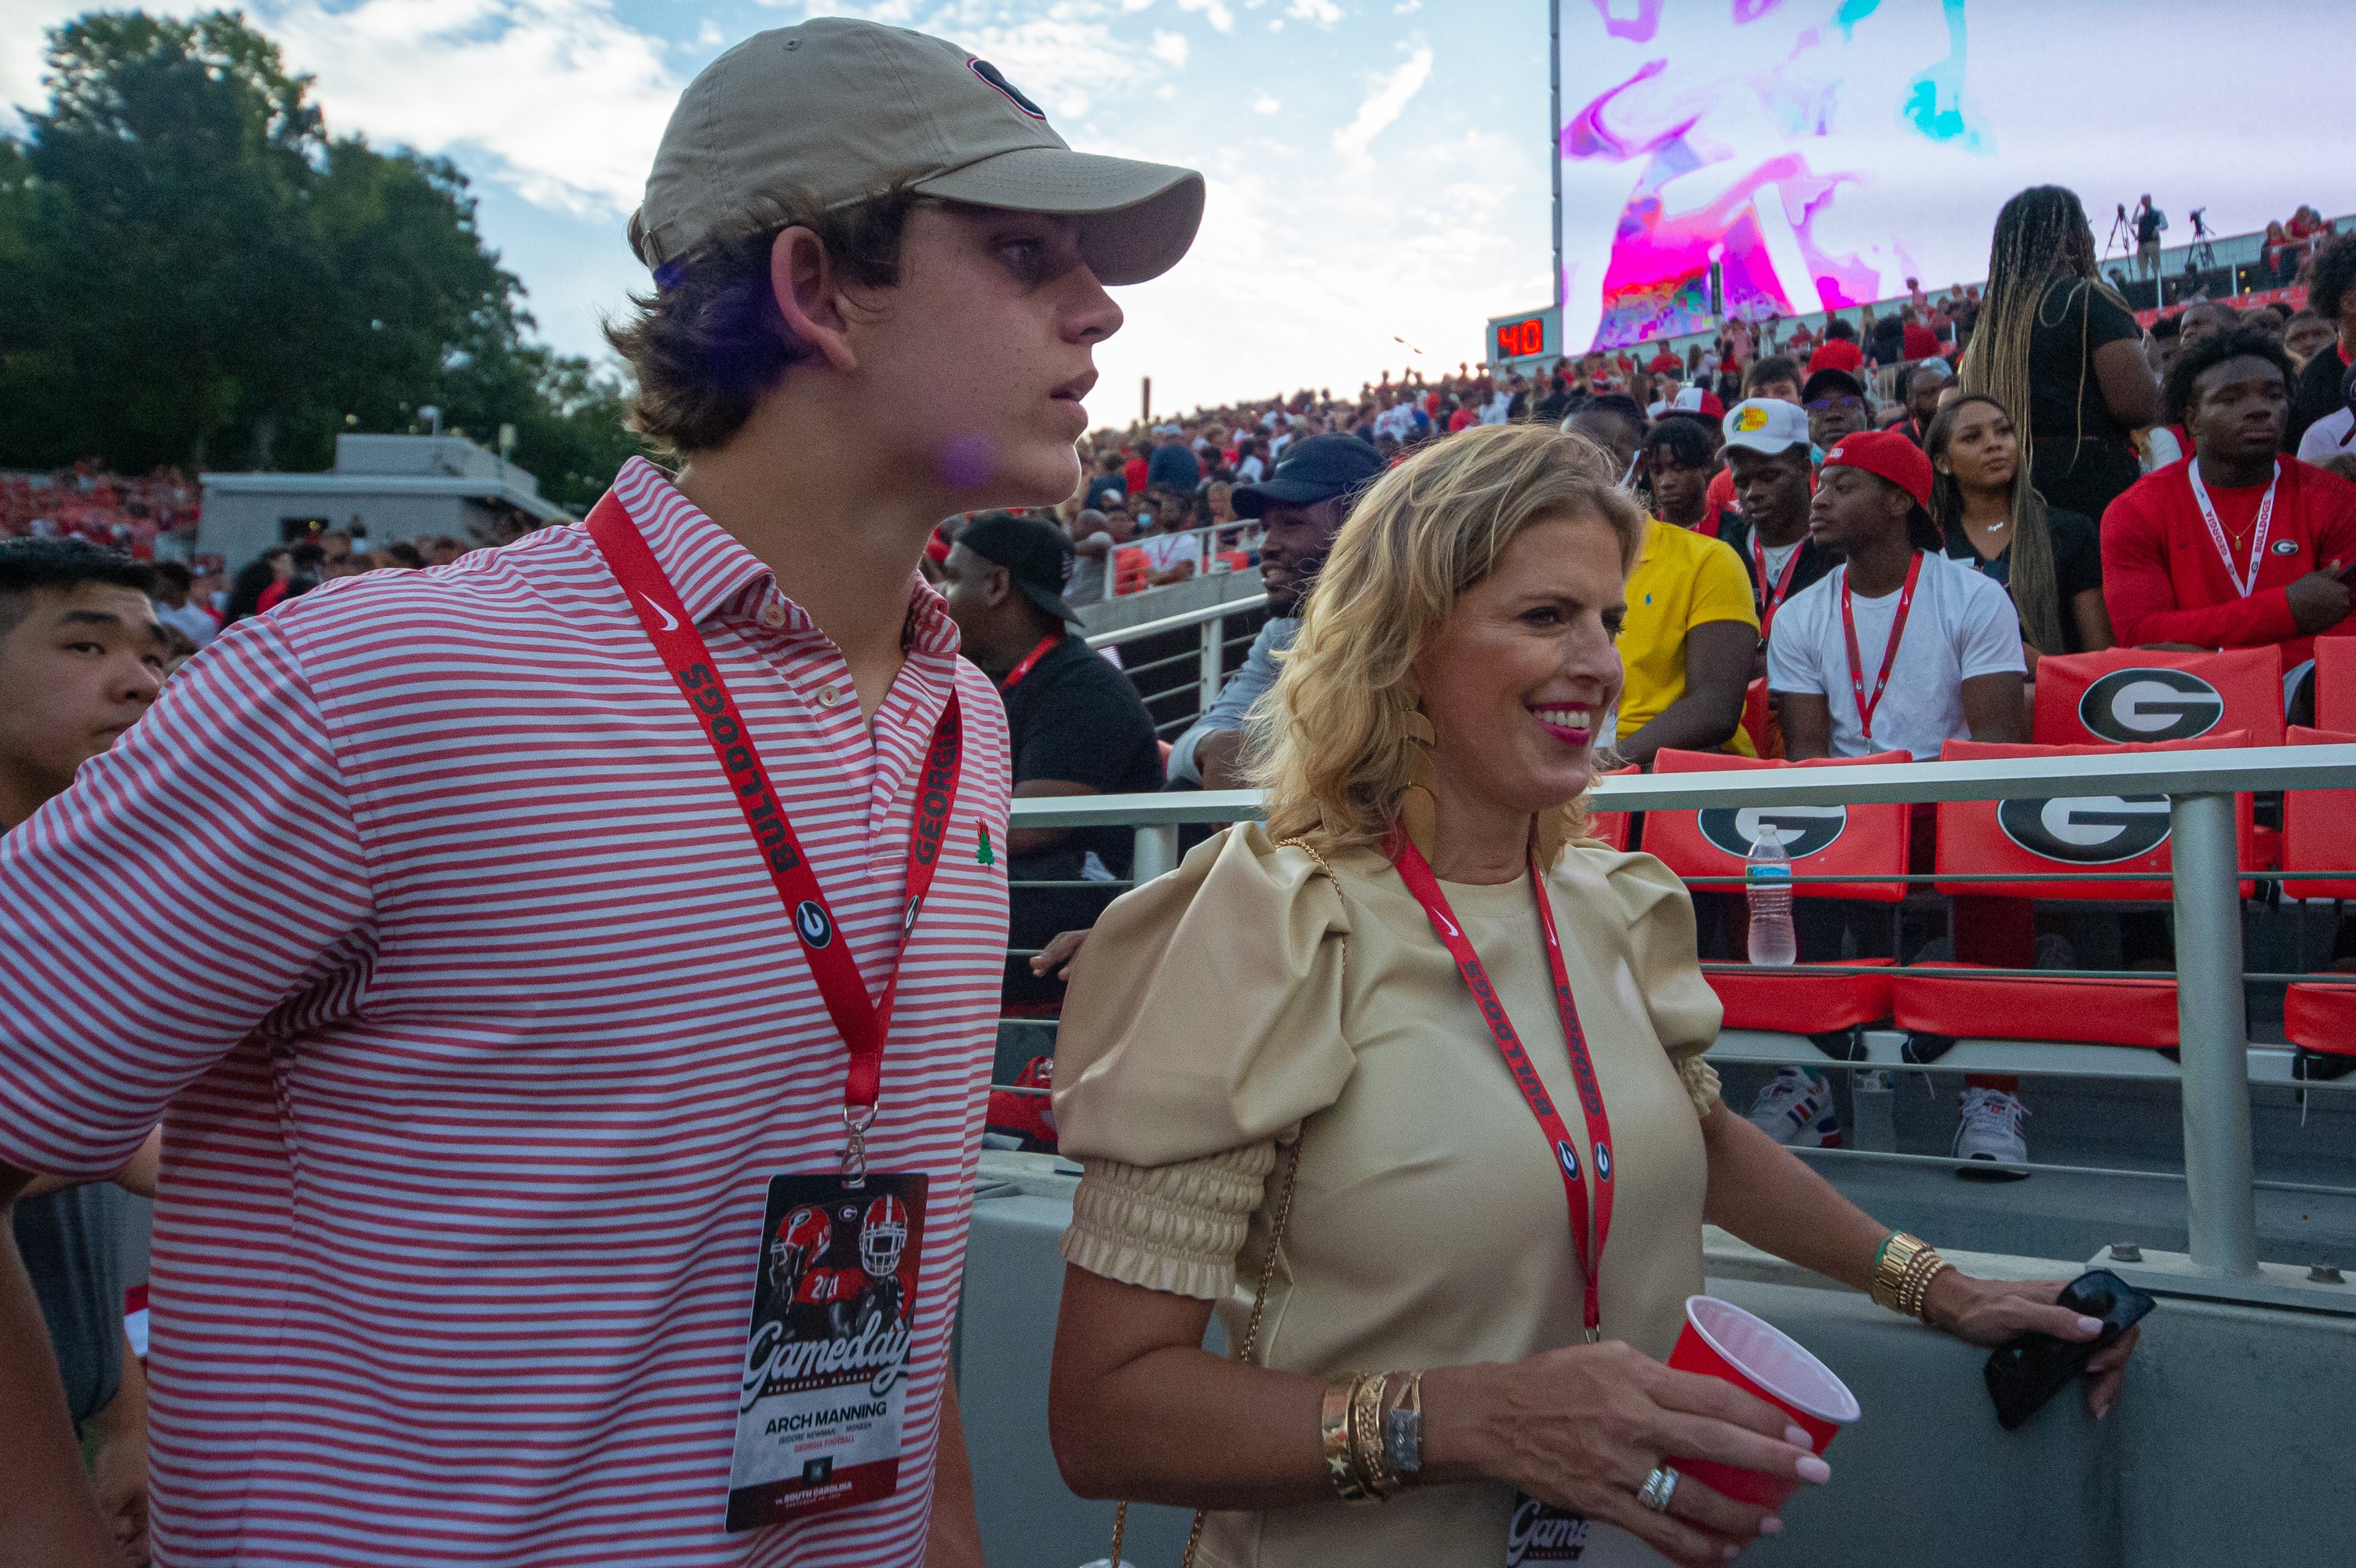 Ellen Manning with her son Arch Manning on September 18, 2021, at Sanford Stadium in Athens | Source: Getty Images